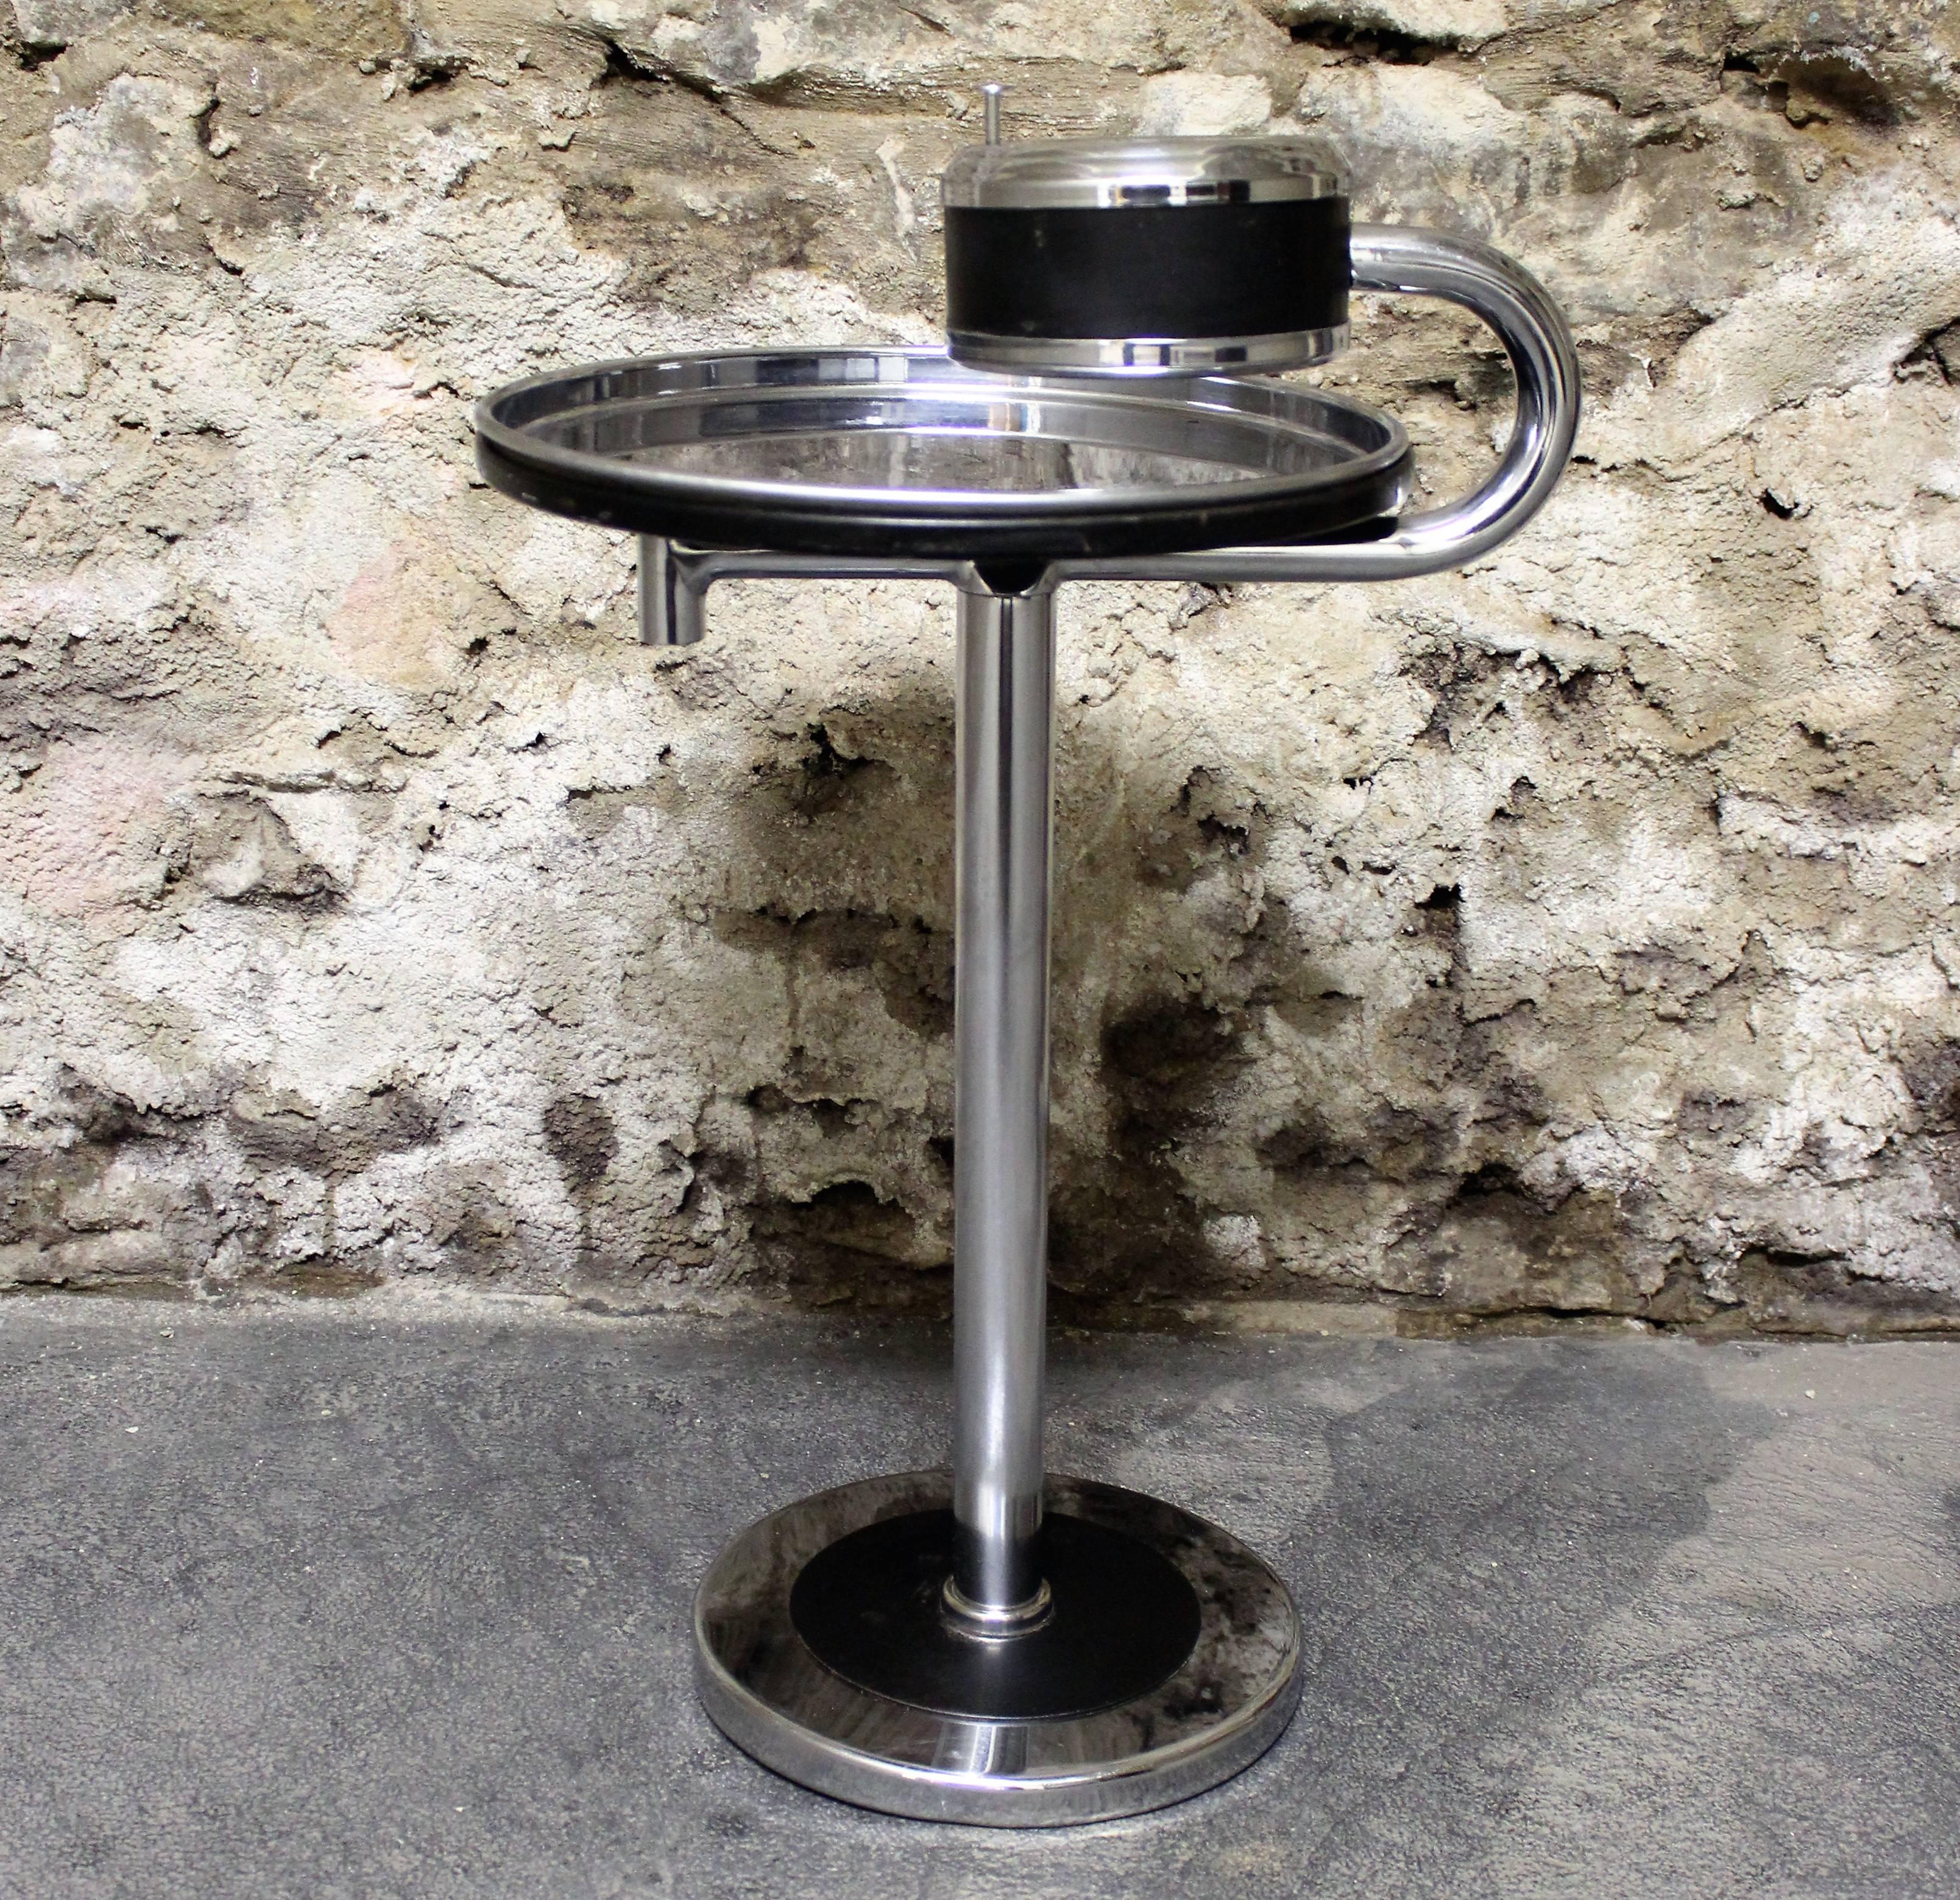 Fantastic chrome smoking stand made for Howell by designer Wolfgang Hoffman. Classic American Art Deco design. It features a great swing arm table for your cocktails, cigarettes, accessories or whatever your pleasure. The ashtray has a push button